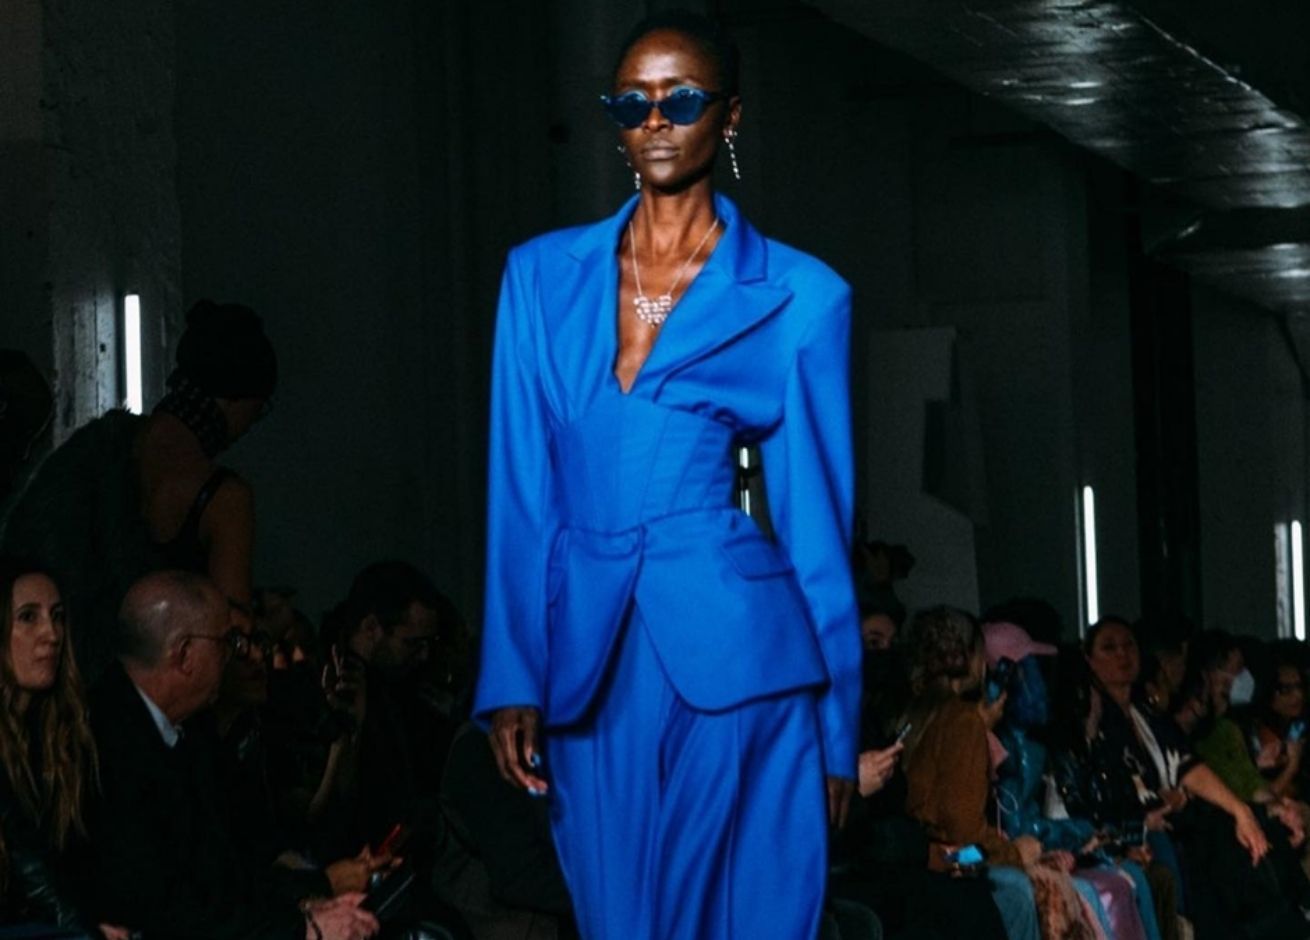 Best looks from NYFW: Christian Siriano